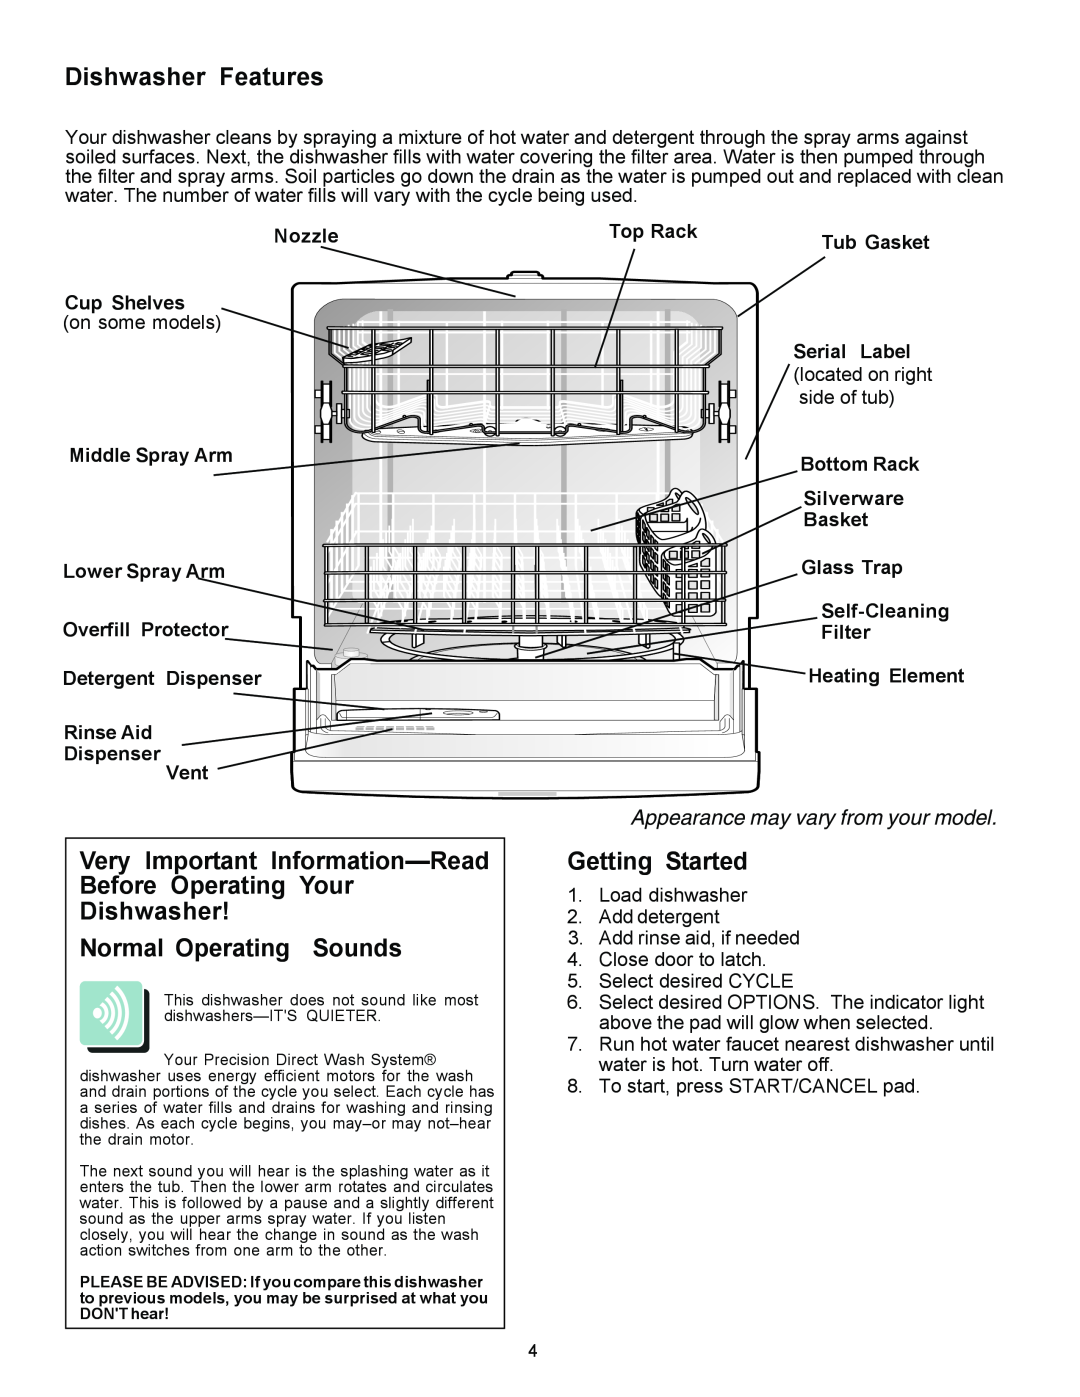 Frigidaire 1500 Series Dishwasher Features, Very Important Information-Read Before Operating Your Dishwasher, Top Rack 